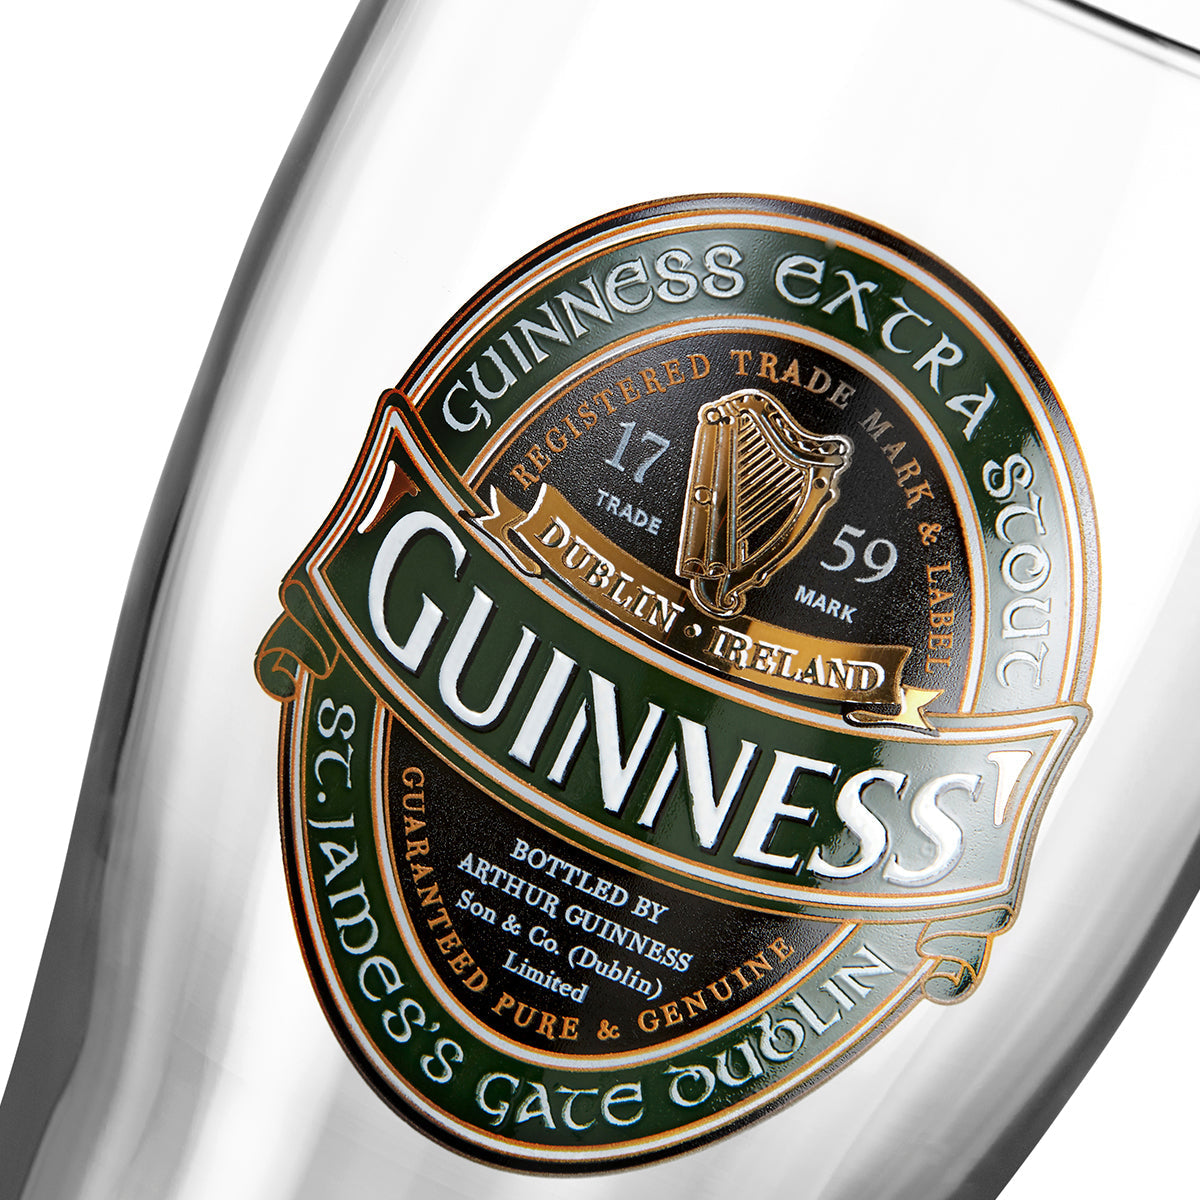 A Guinness Ireland Collection Pint Glass - 24 Pack with a label on it.